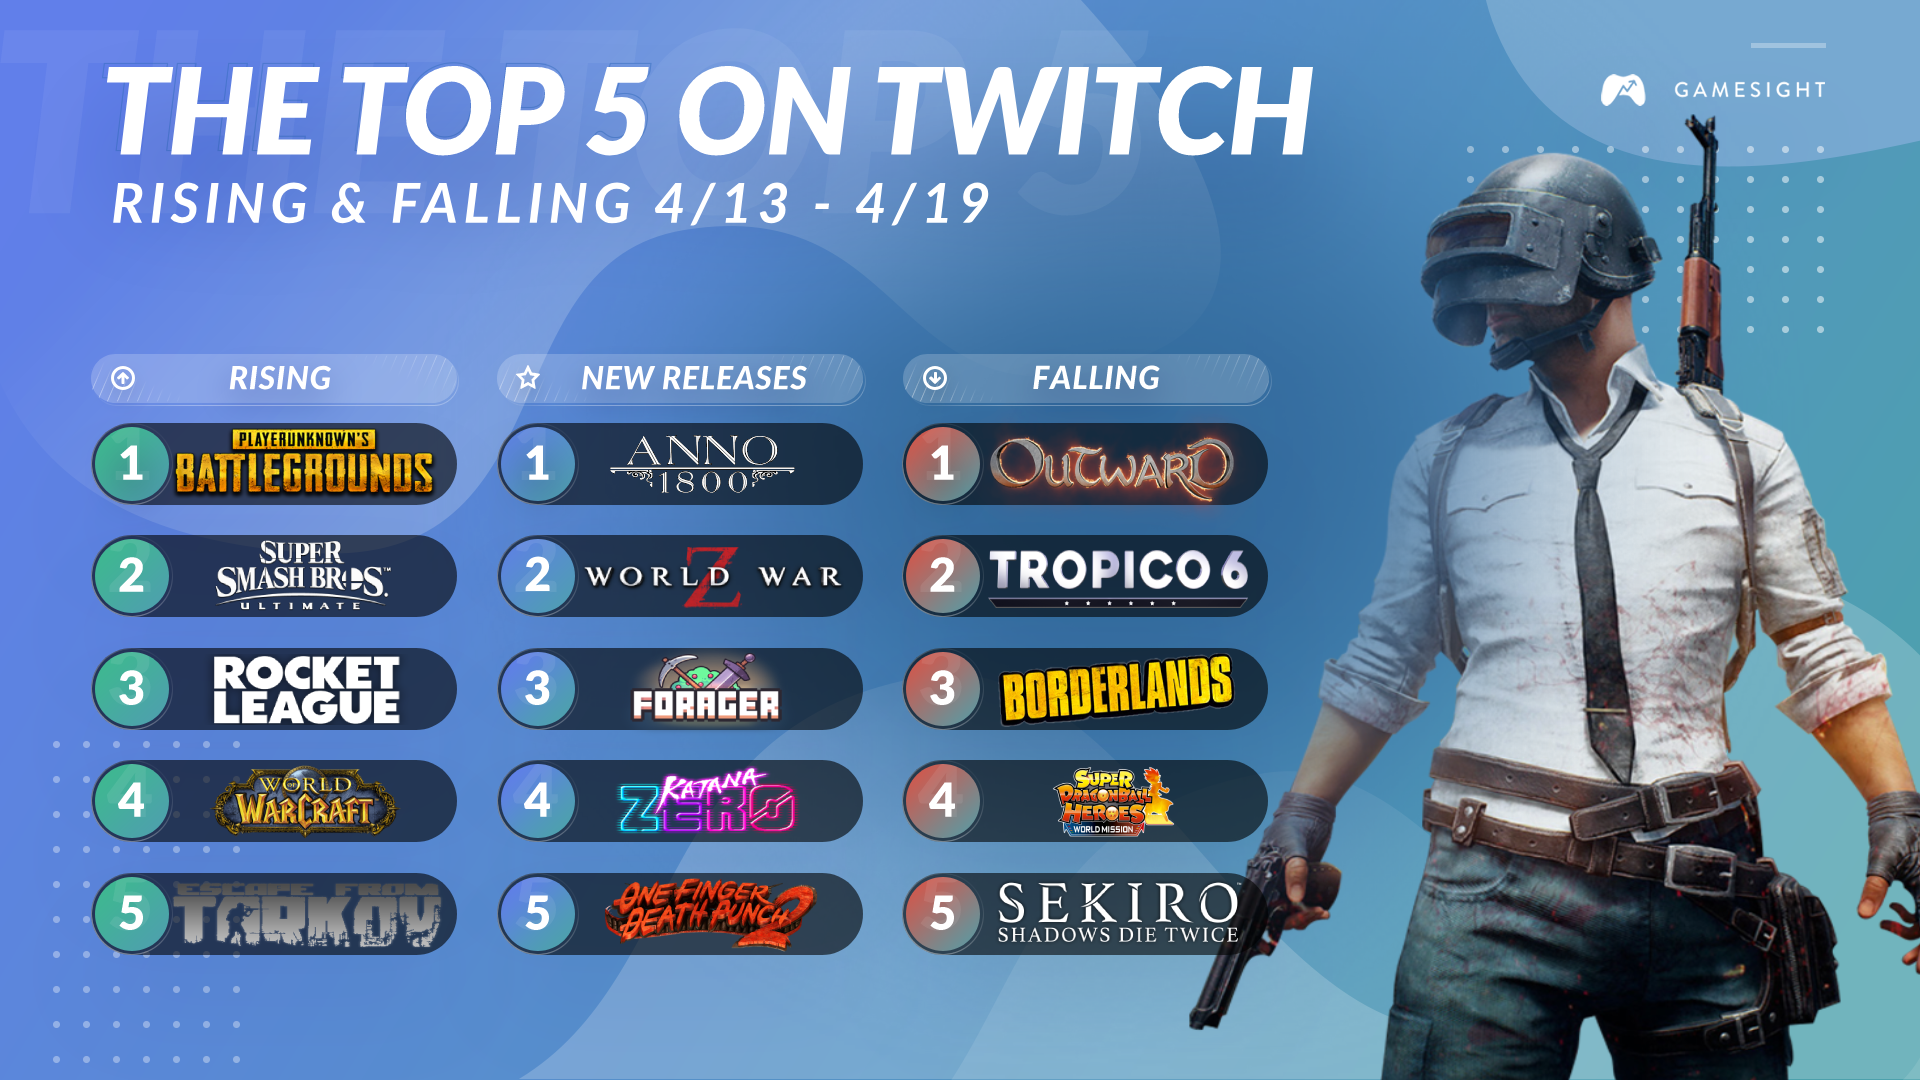 Lessons from #Top5OnTwitch: A Big Launch Doesn't Always Last